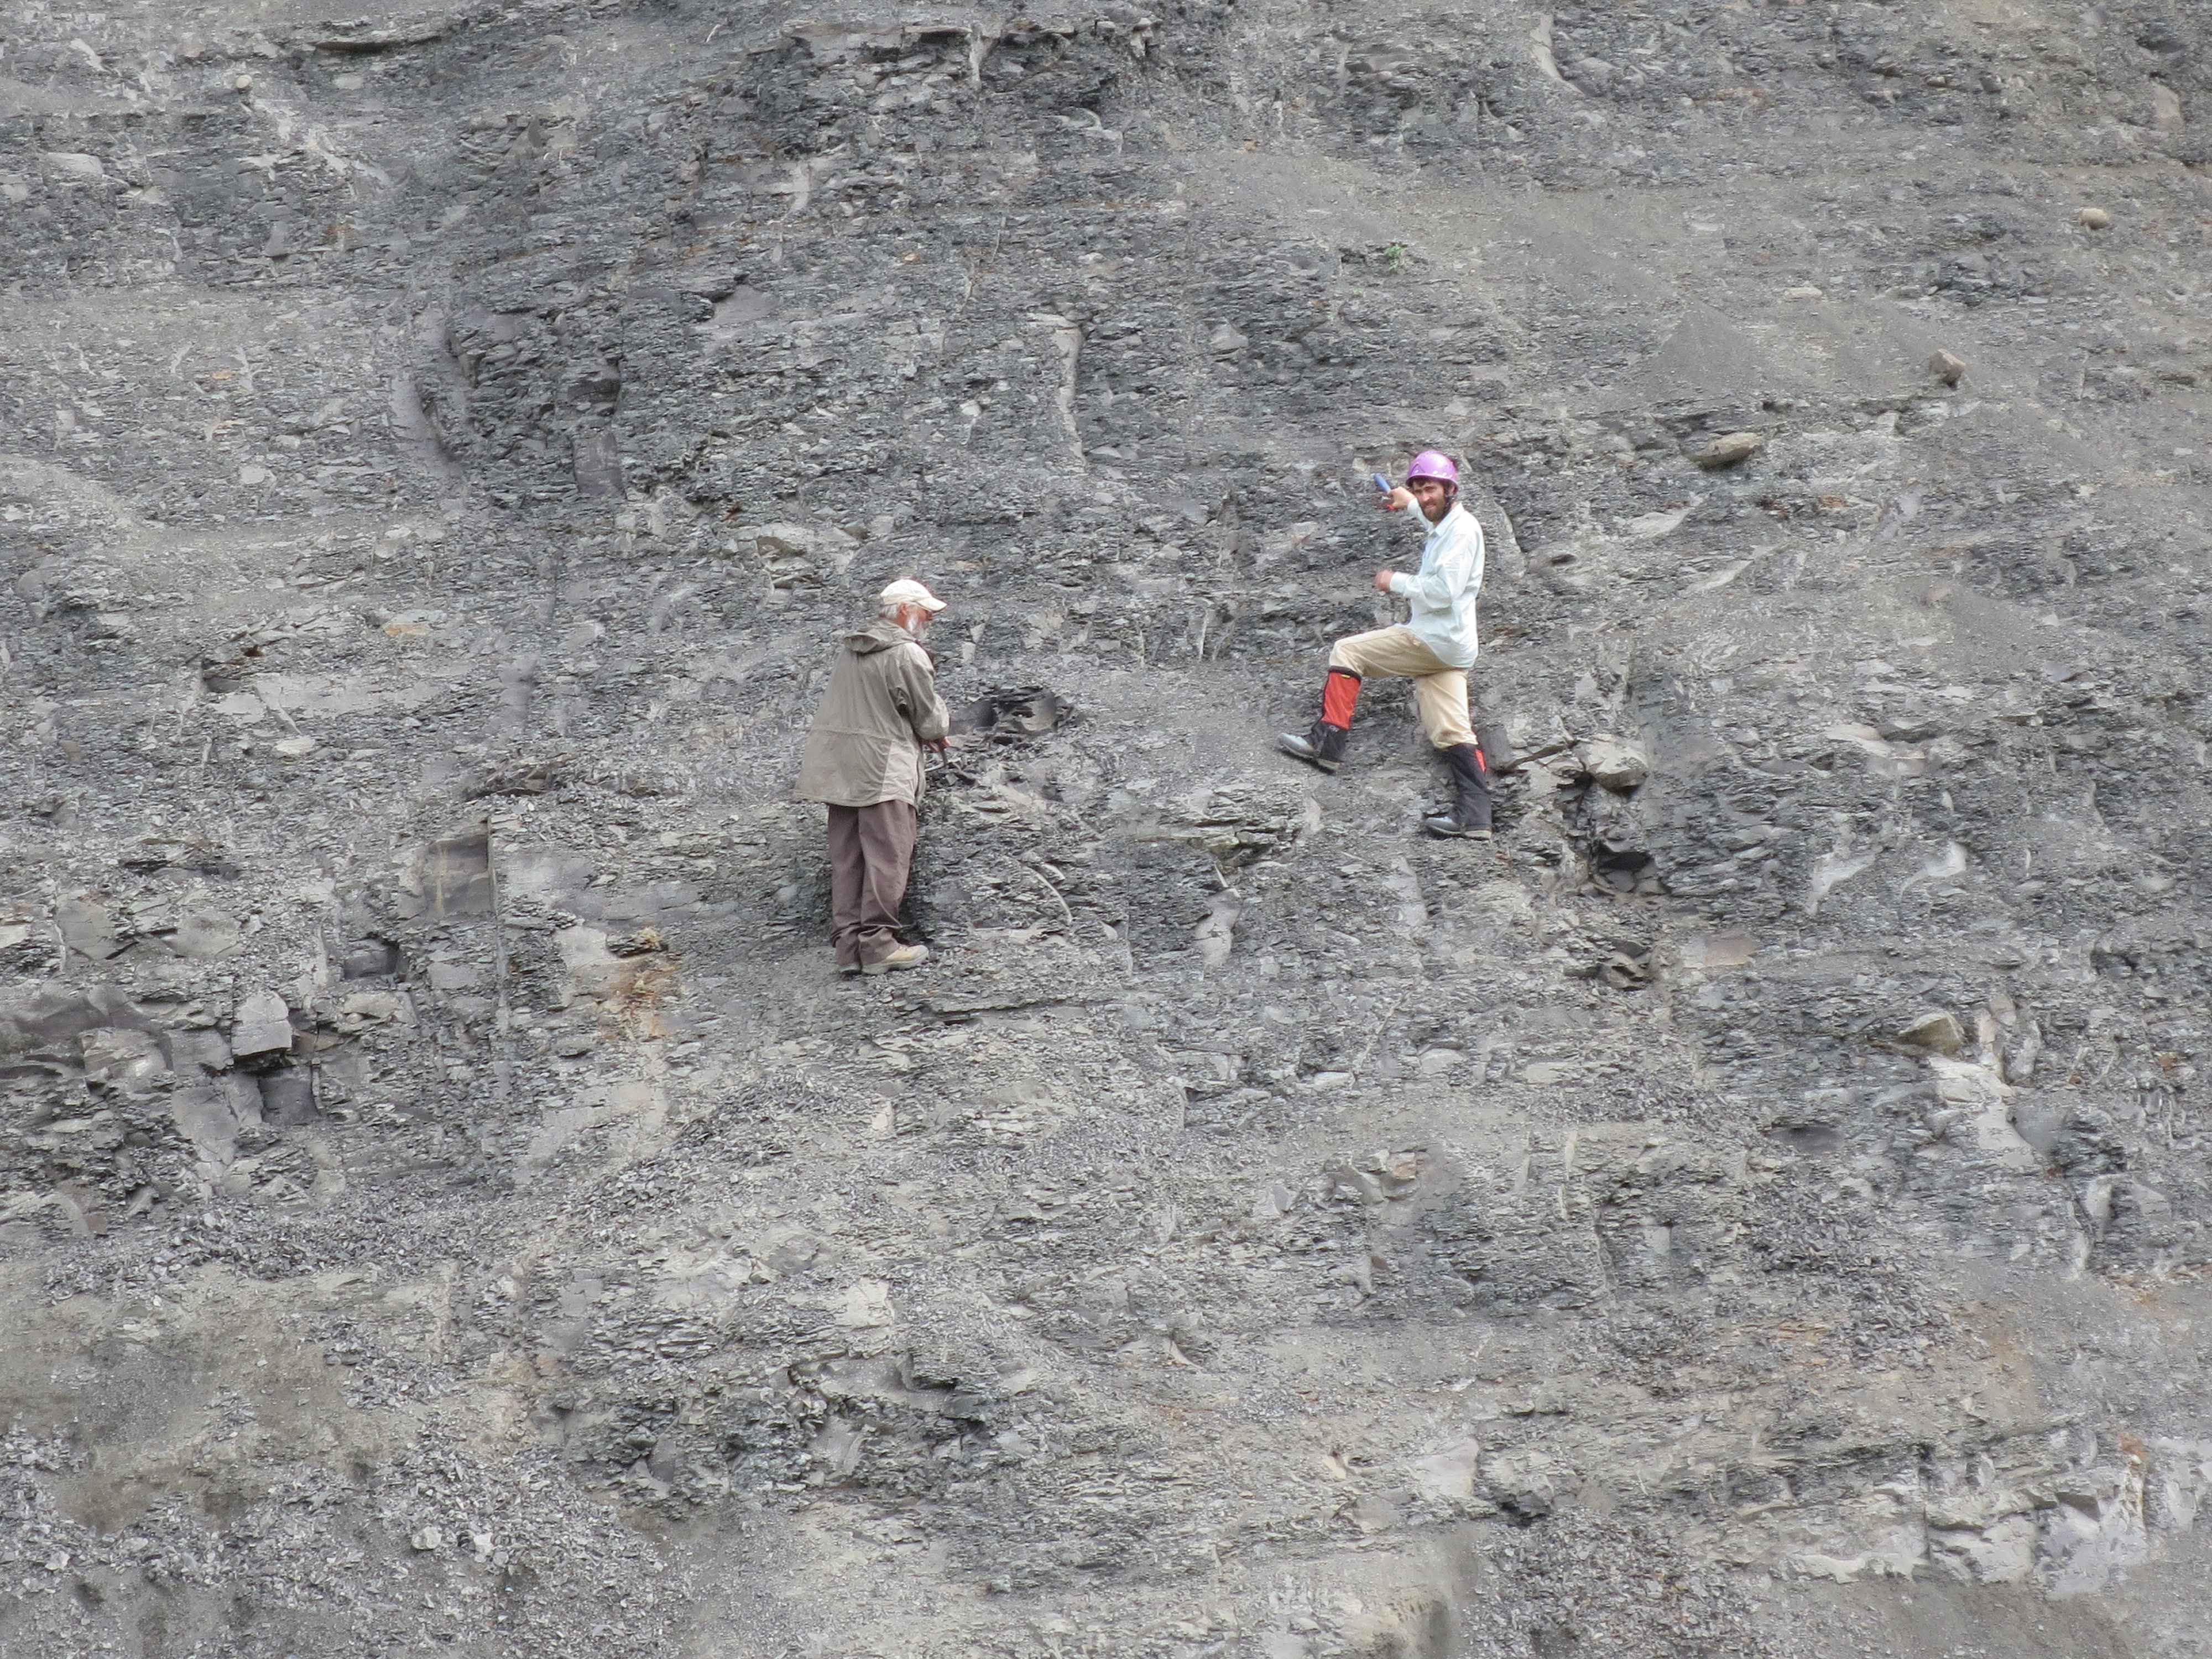 Photo by Pat Druckenmiller. Curvin Metzler (left), who discovered the elasmosaur fossil, and UAMN earth sciences curator Patrick Druckenmiller examine the spot where bones were found sticking out of the cliff in the Talkeetna Mountains.